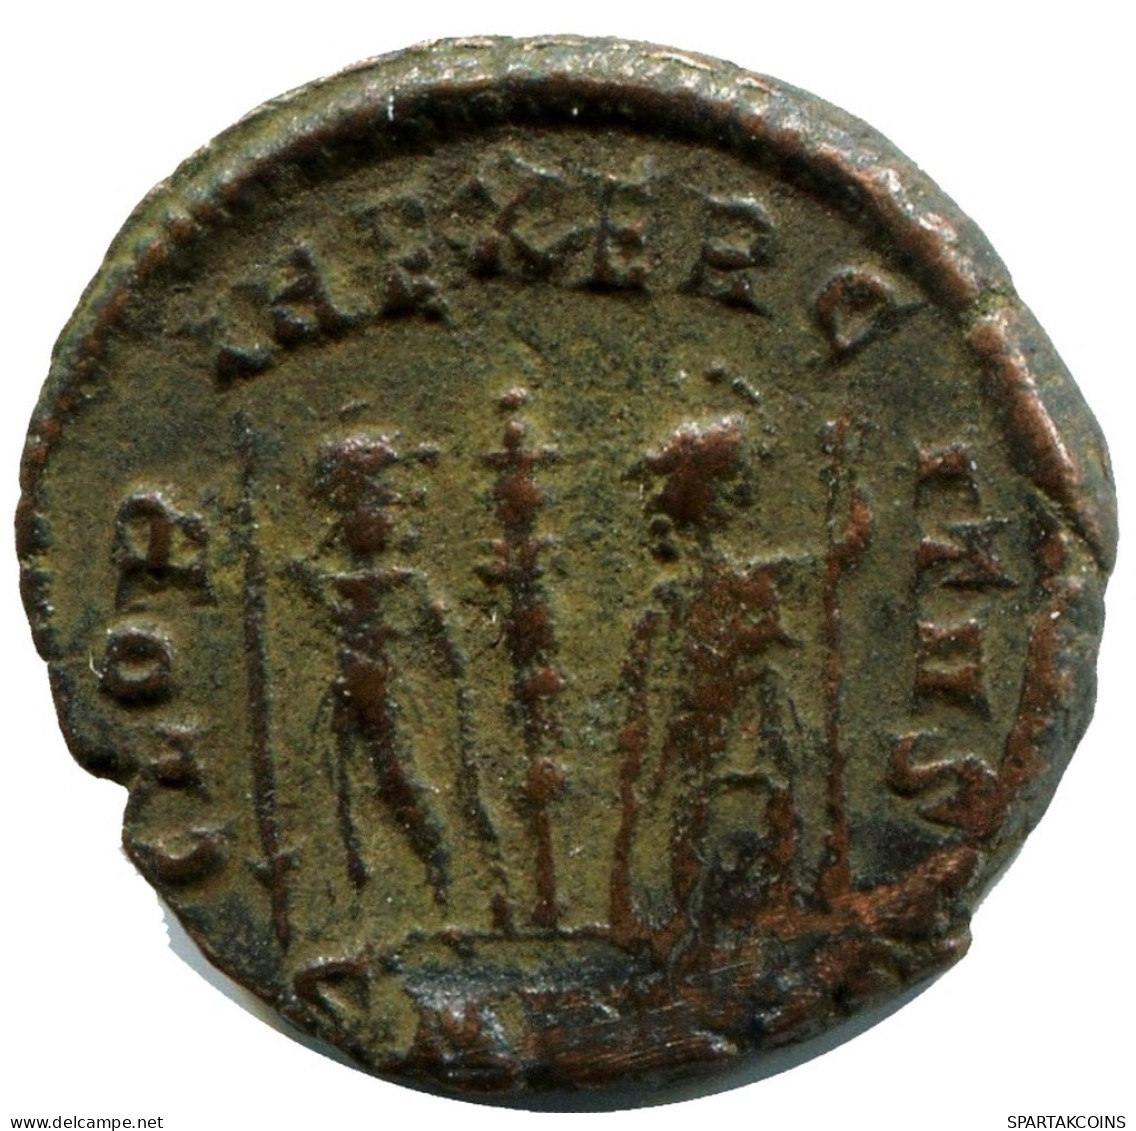 CONSTANS MINTED IN ANTIOCH FOUND IN IHNASYAH HOARD EGYPT #ANC11796.14.U.A - The Christian Empire (307 AD To 363 AD)